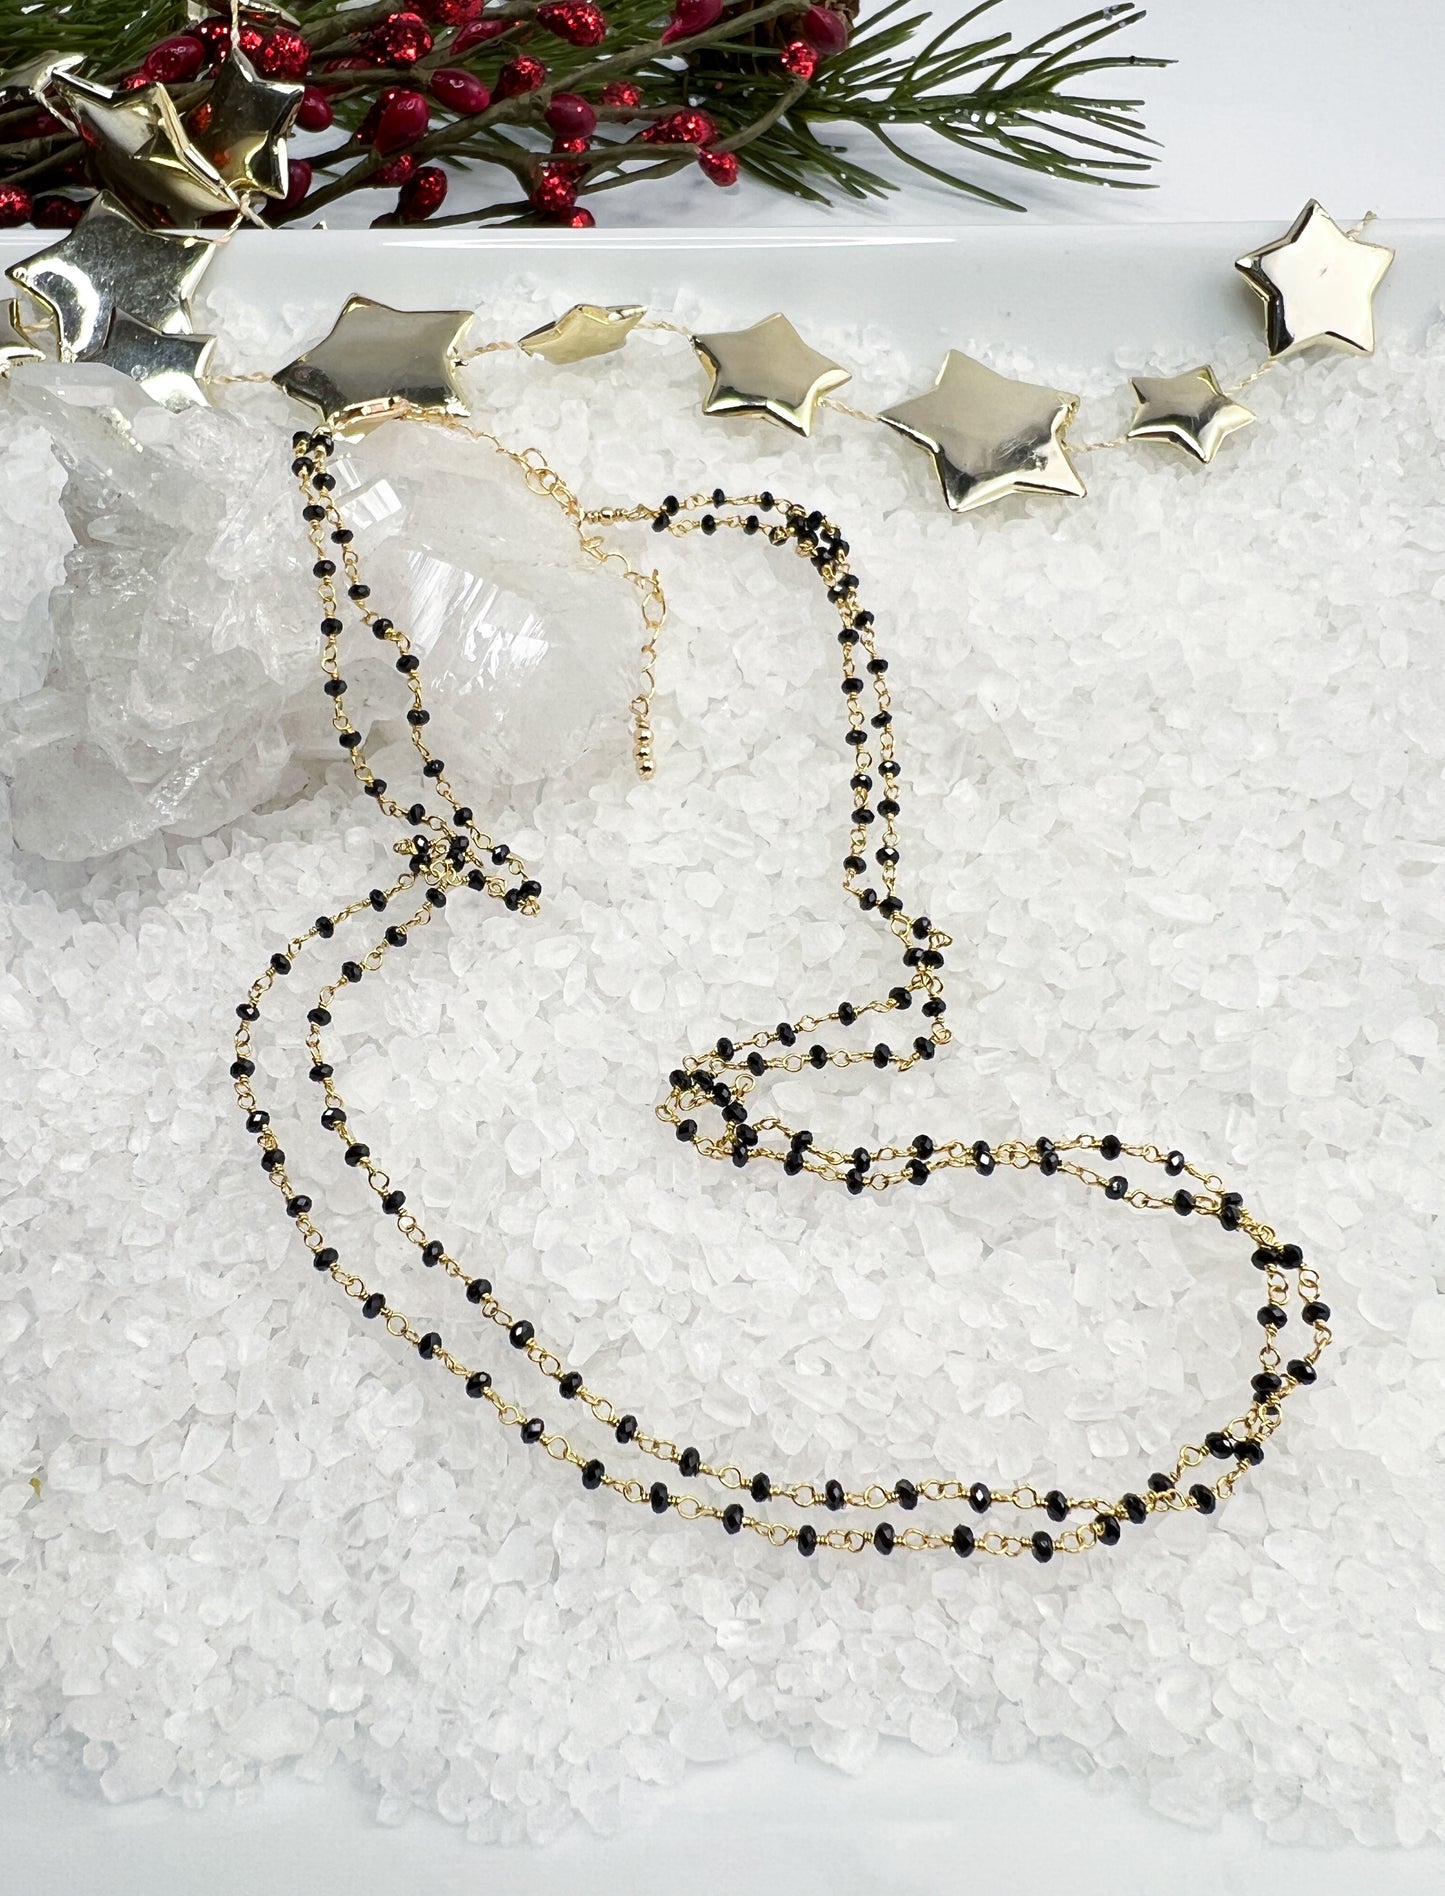 Black Spinel Rosary Double chain Necklace